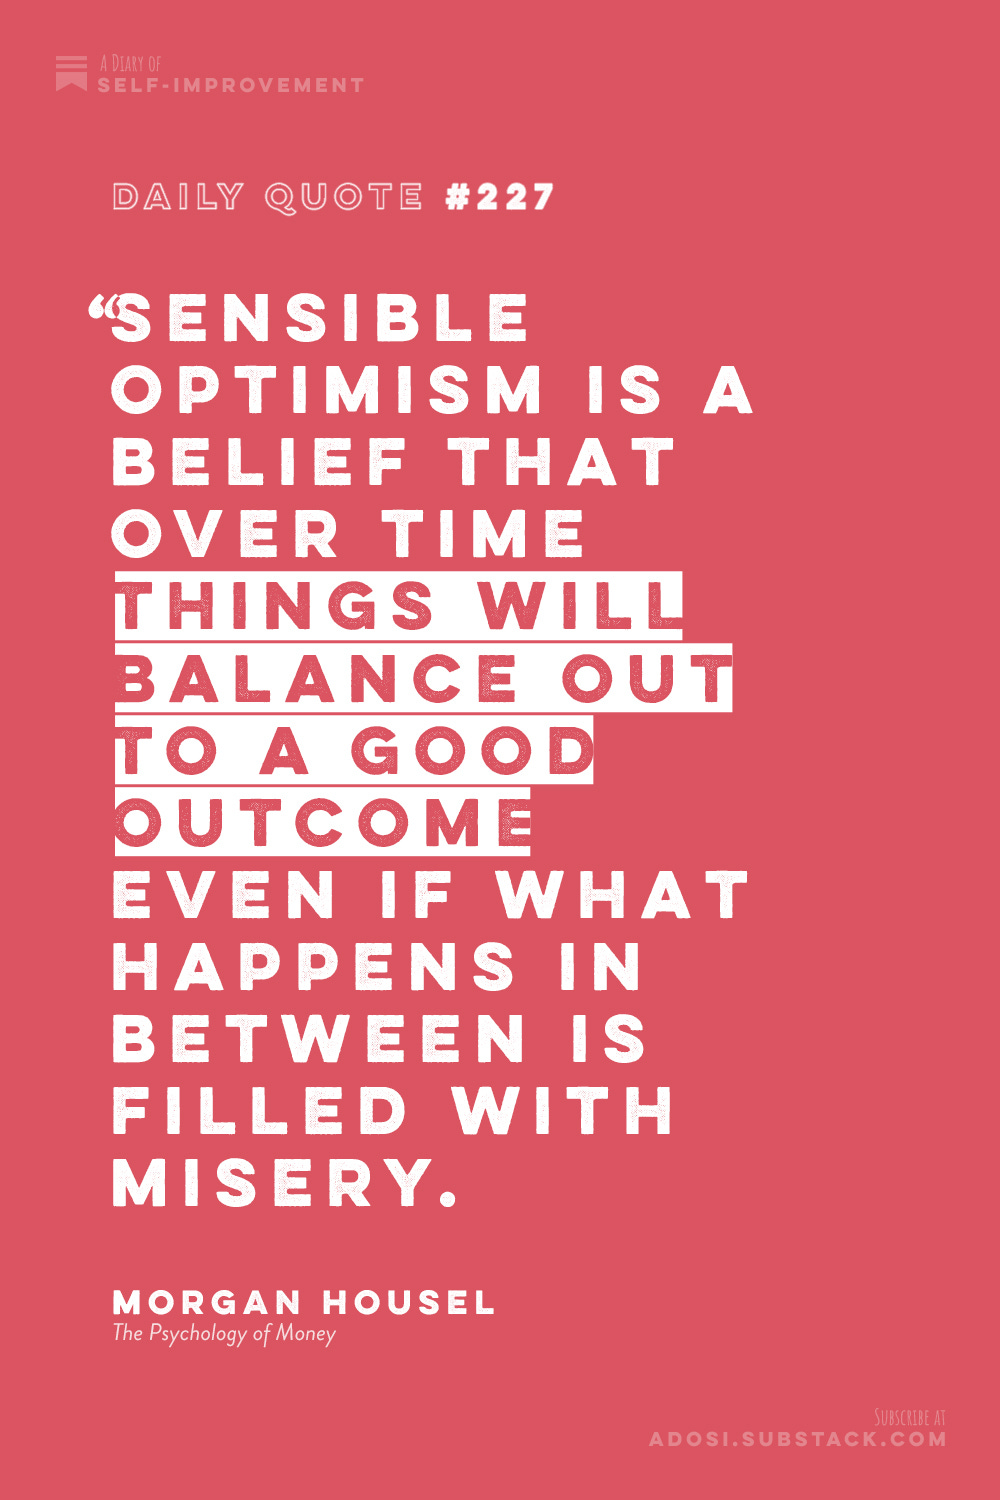 Daily Quote #227: "Sensible optimism is a belief that over time things will balance out to a good outcome even if what happens in between is filled with misery." Morgan Housel, The Psychology of Money